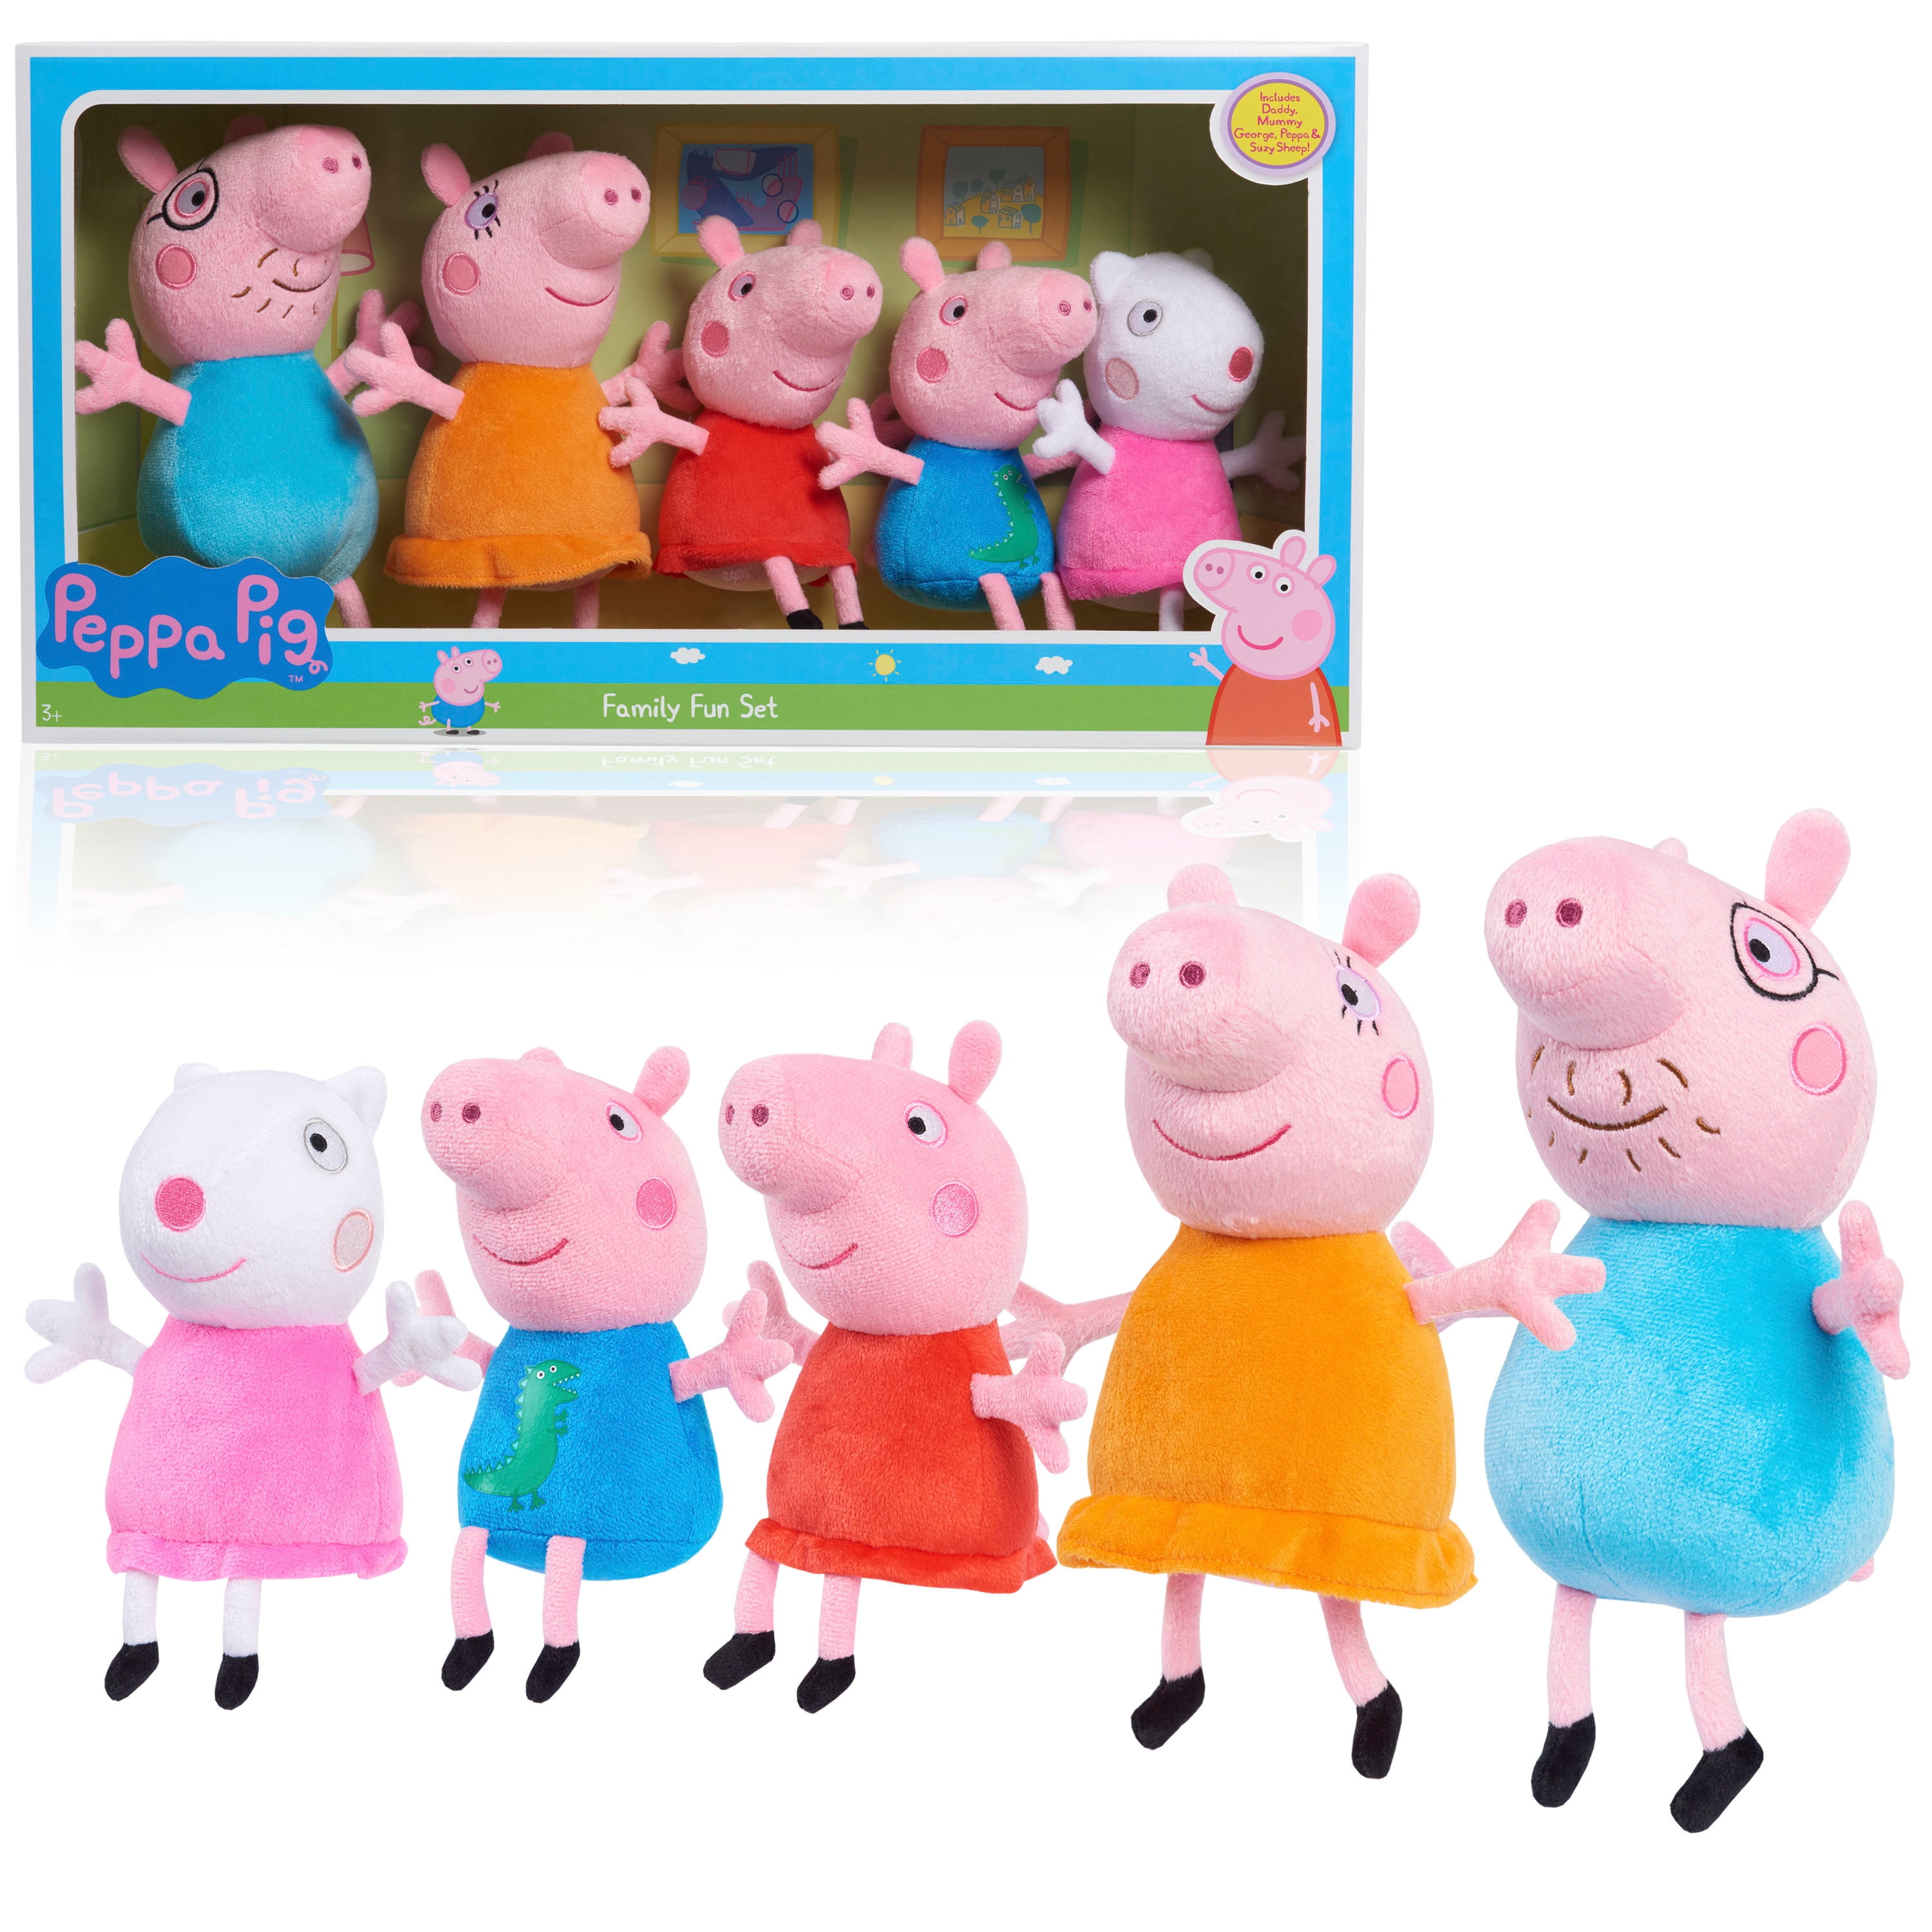 Peppa Pig Family Fun Plush Toys 5 Pack Includes Peppa, George, Mummy,  Daddy, and Suzy Sheep, Super Soft & Cuddly Stuffed Animals, Kids Toys for  Ages 3 Up, Gifts and Presents 